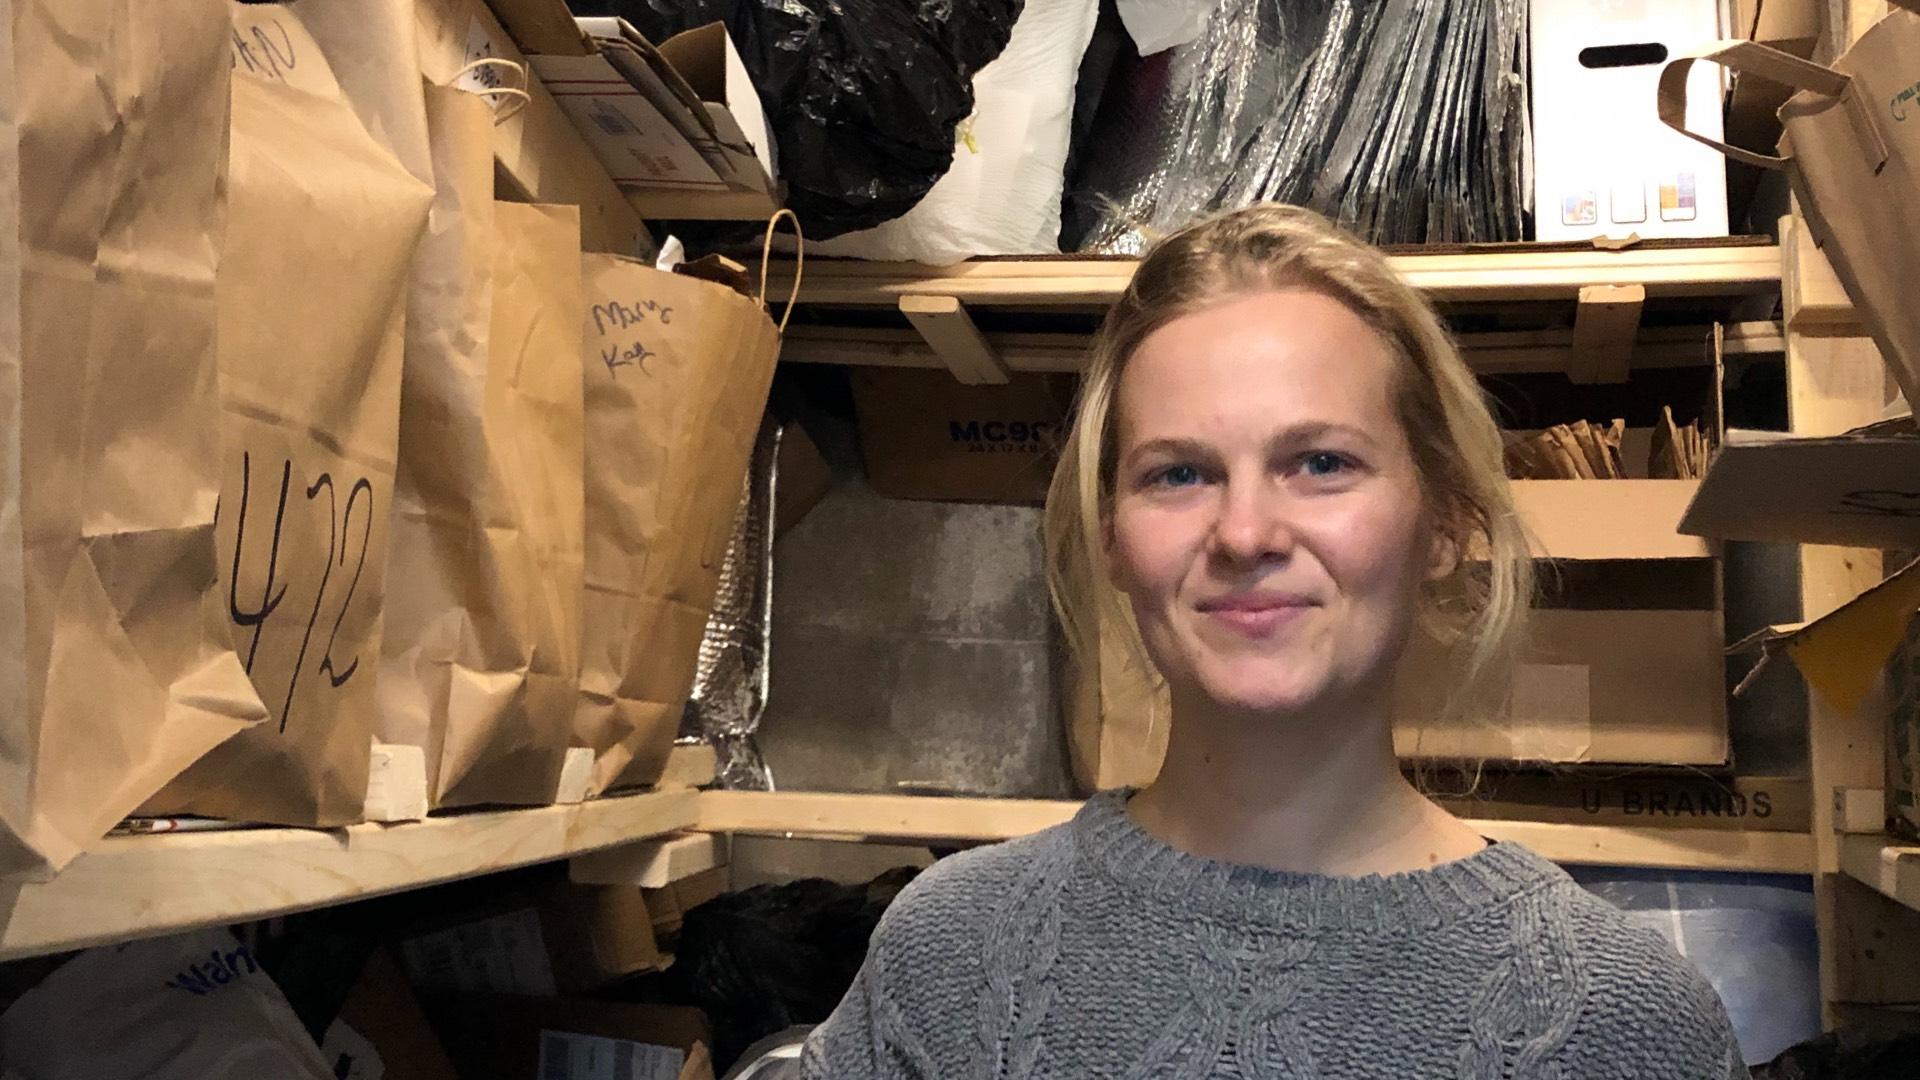 Aleksandra Plewa of EcoShip grew up in Jefferson Park, the daughter of Polish immigrants. She credits her mom for her recycling habits. "When I was growing up, we'd collect all our stuff and drop it off anywhere there was recycling. She really knew her stuff." (Patty Wetli / WTTW News)